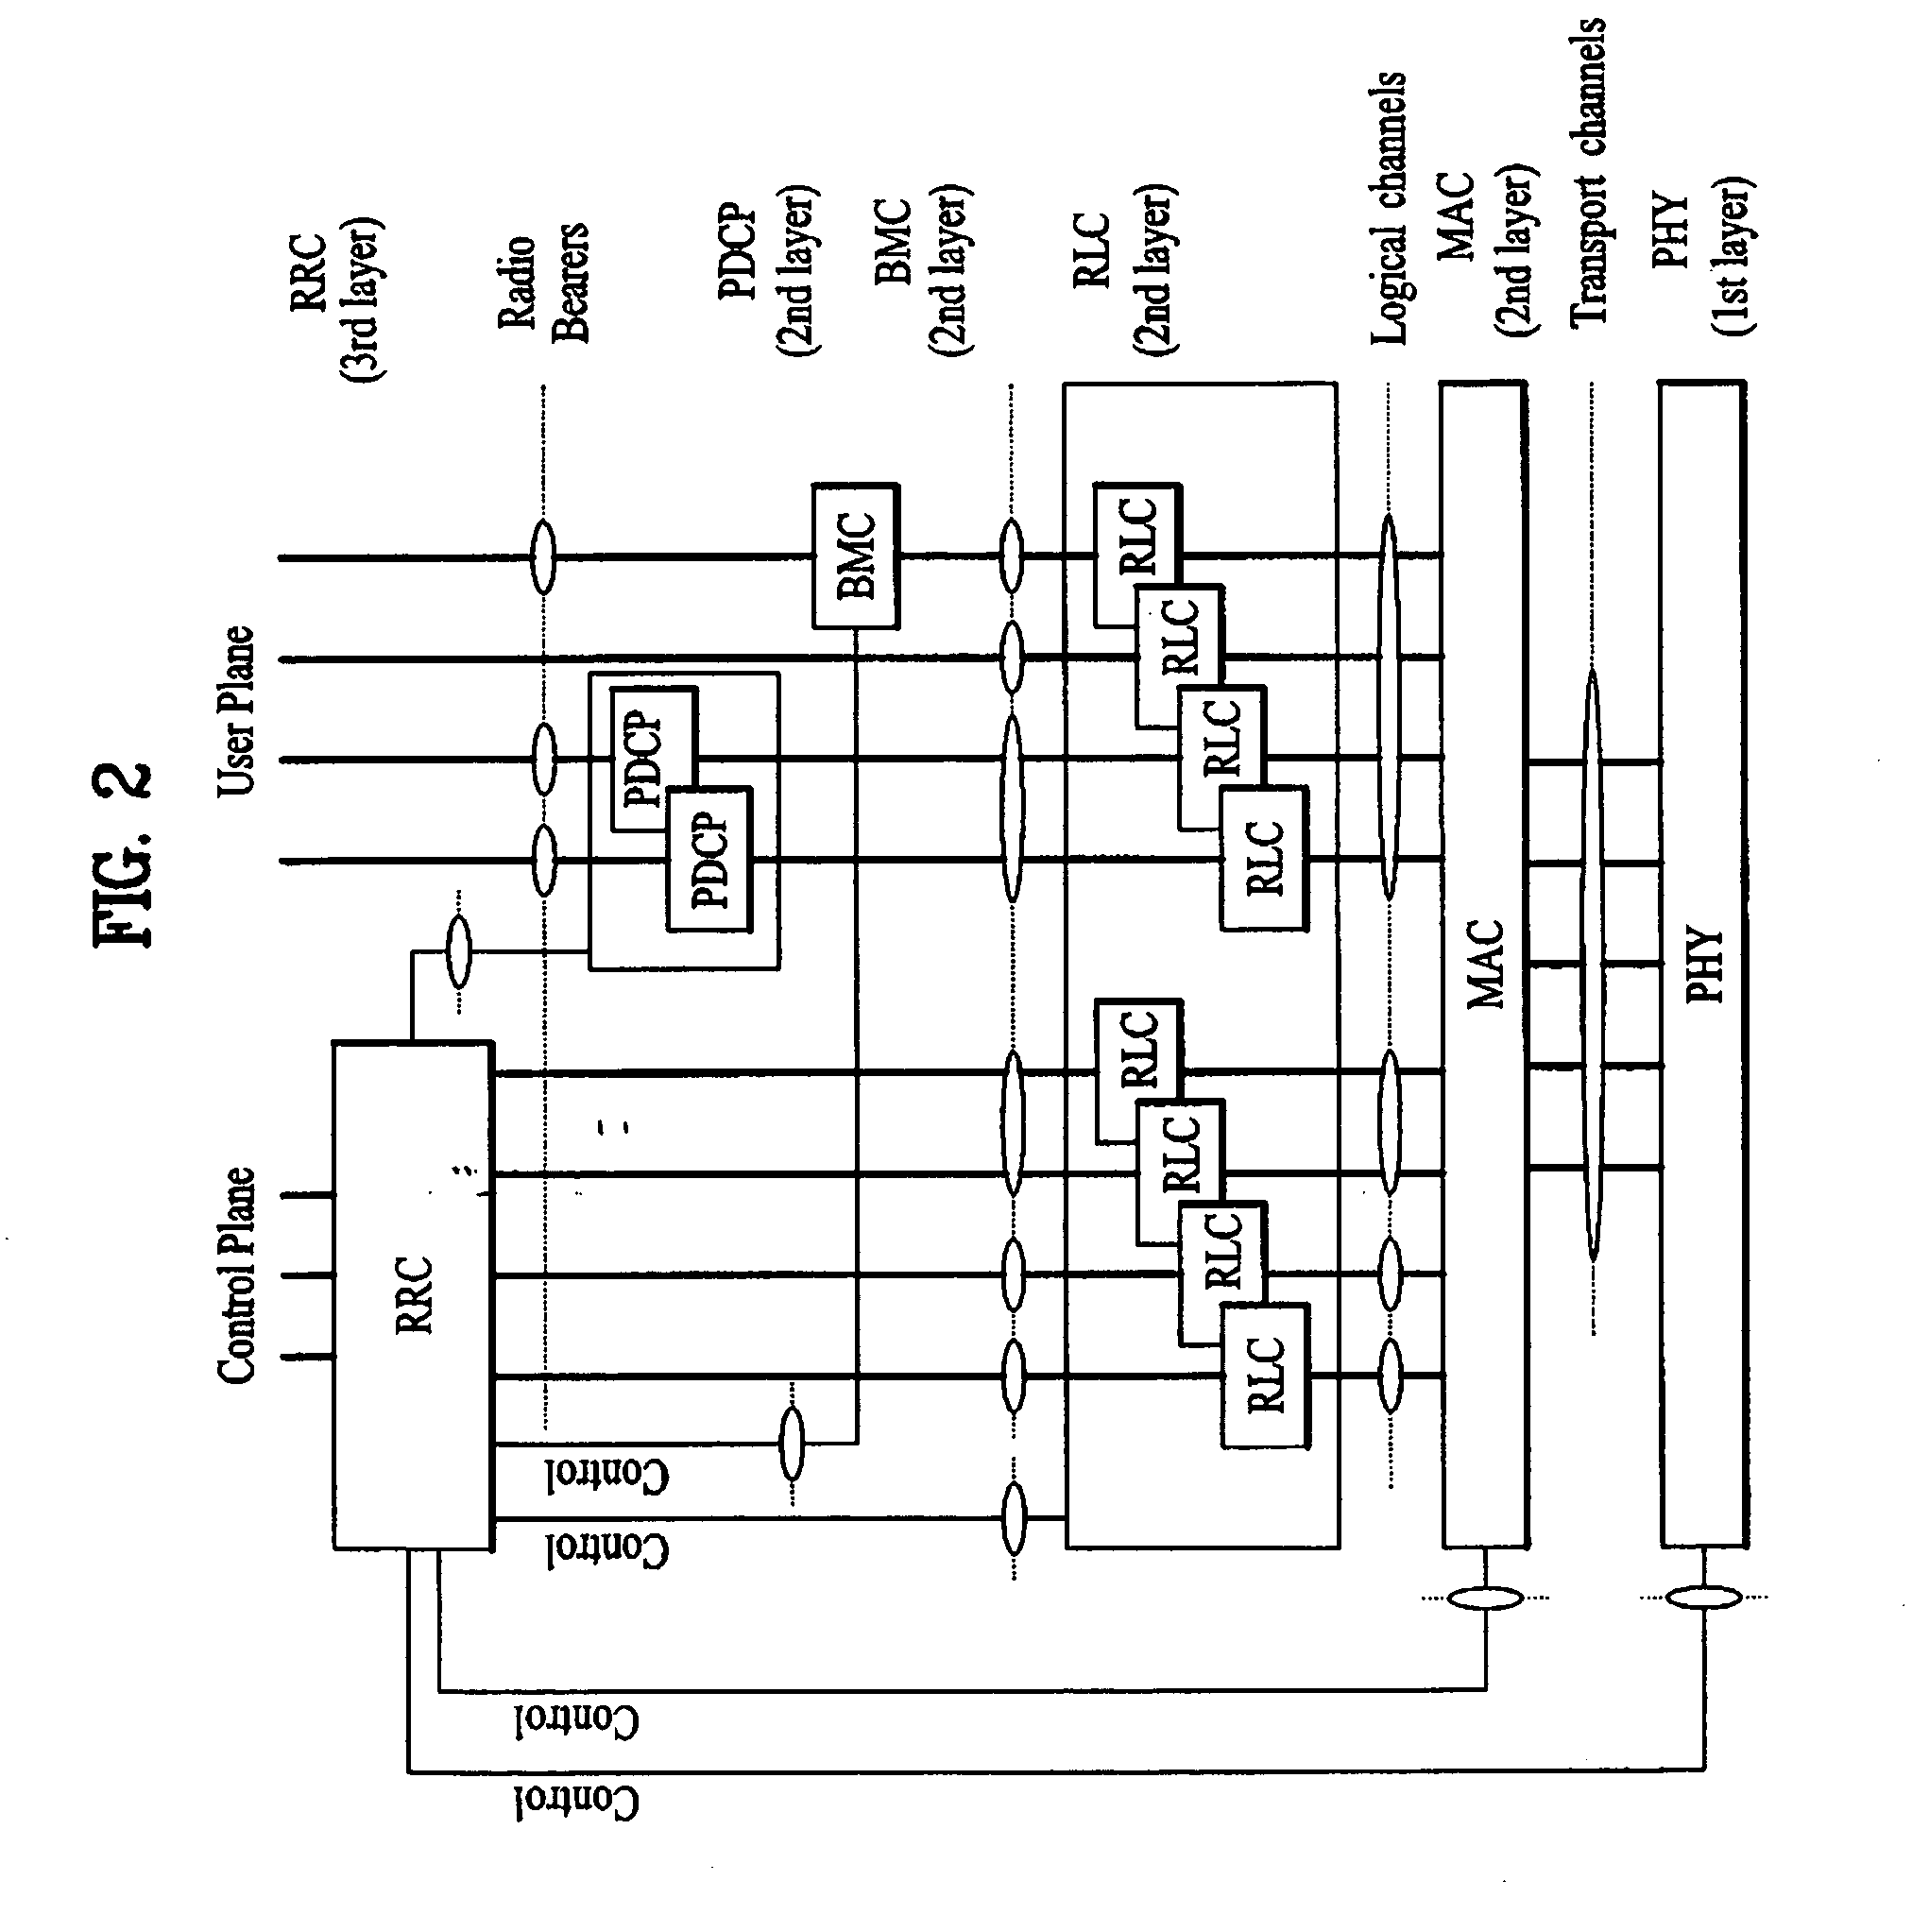 Communicating control information in mobile communication system